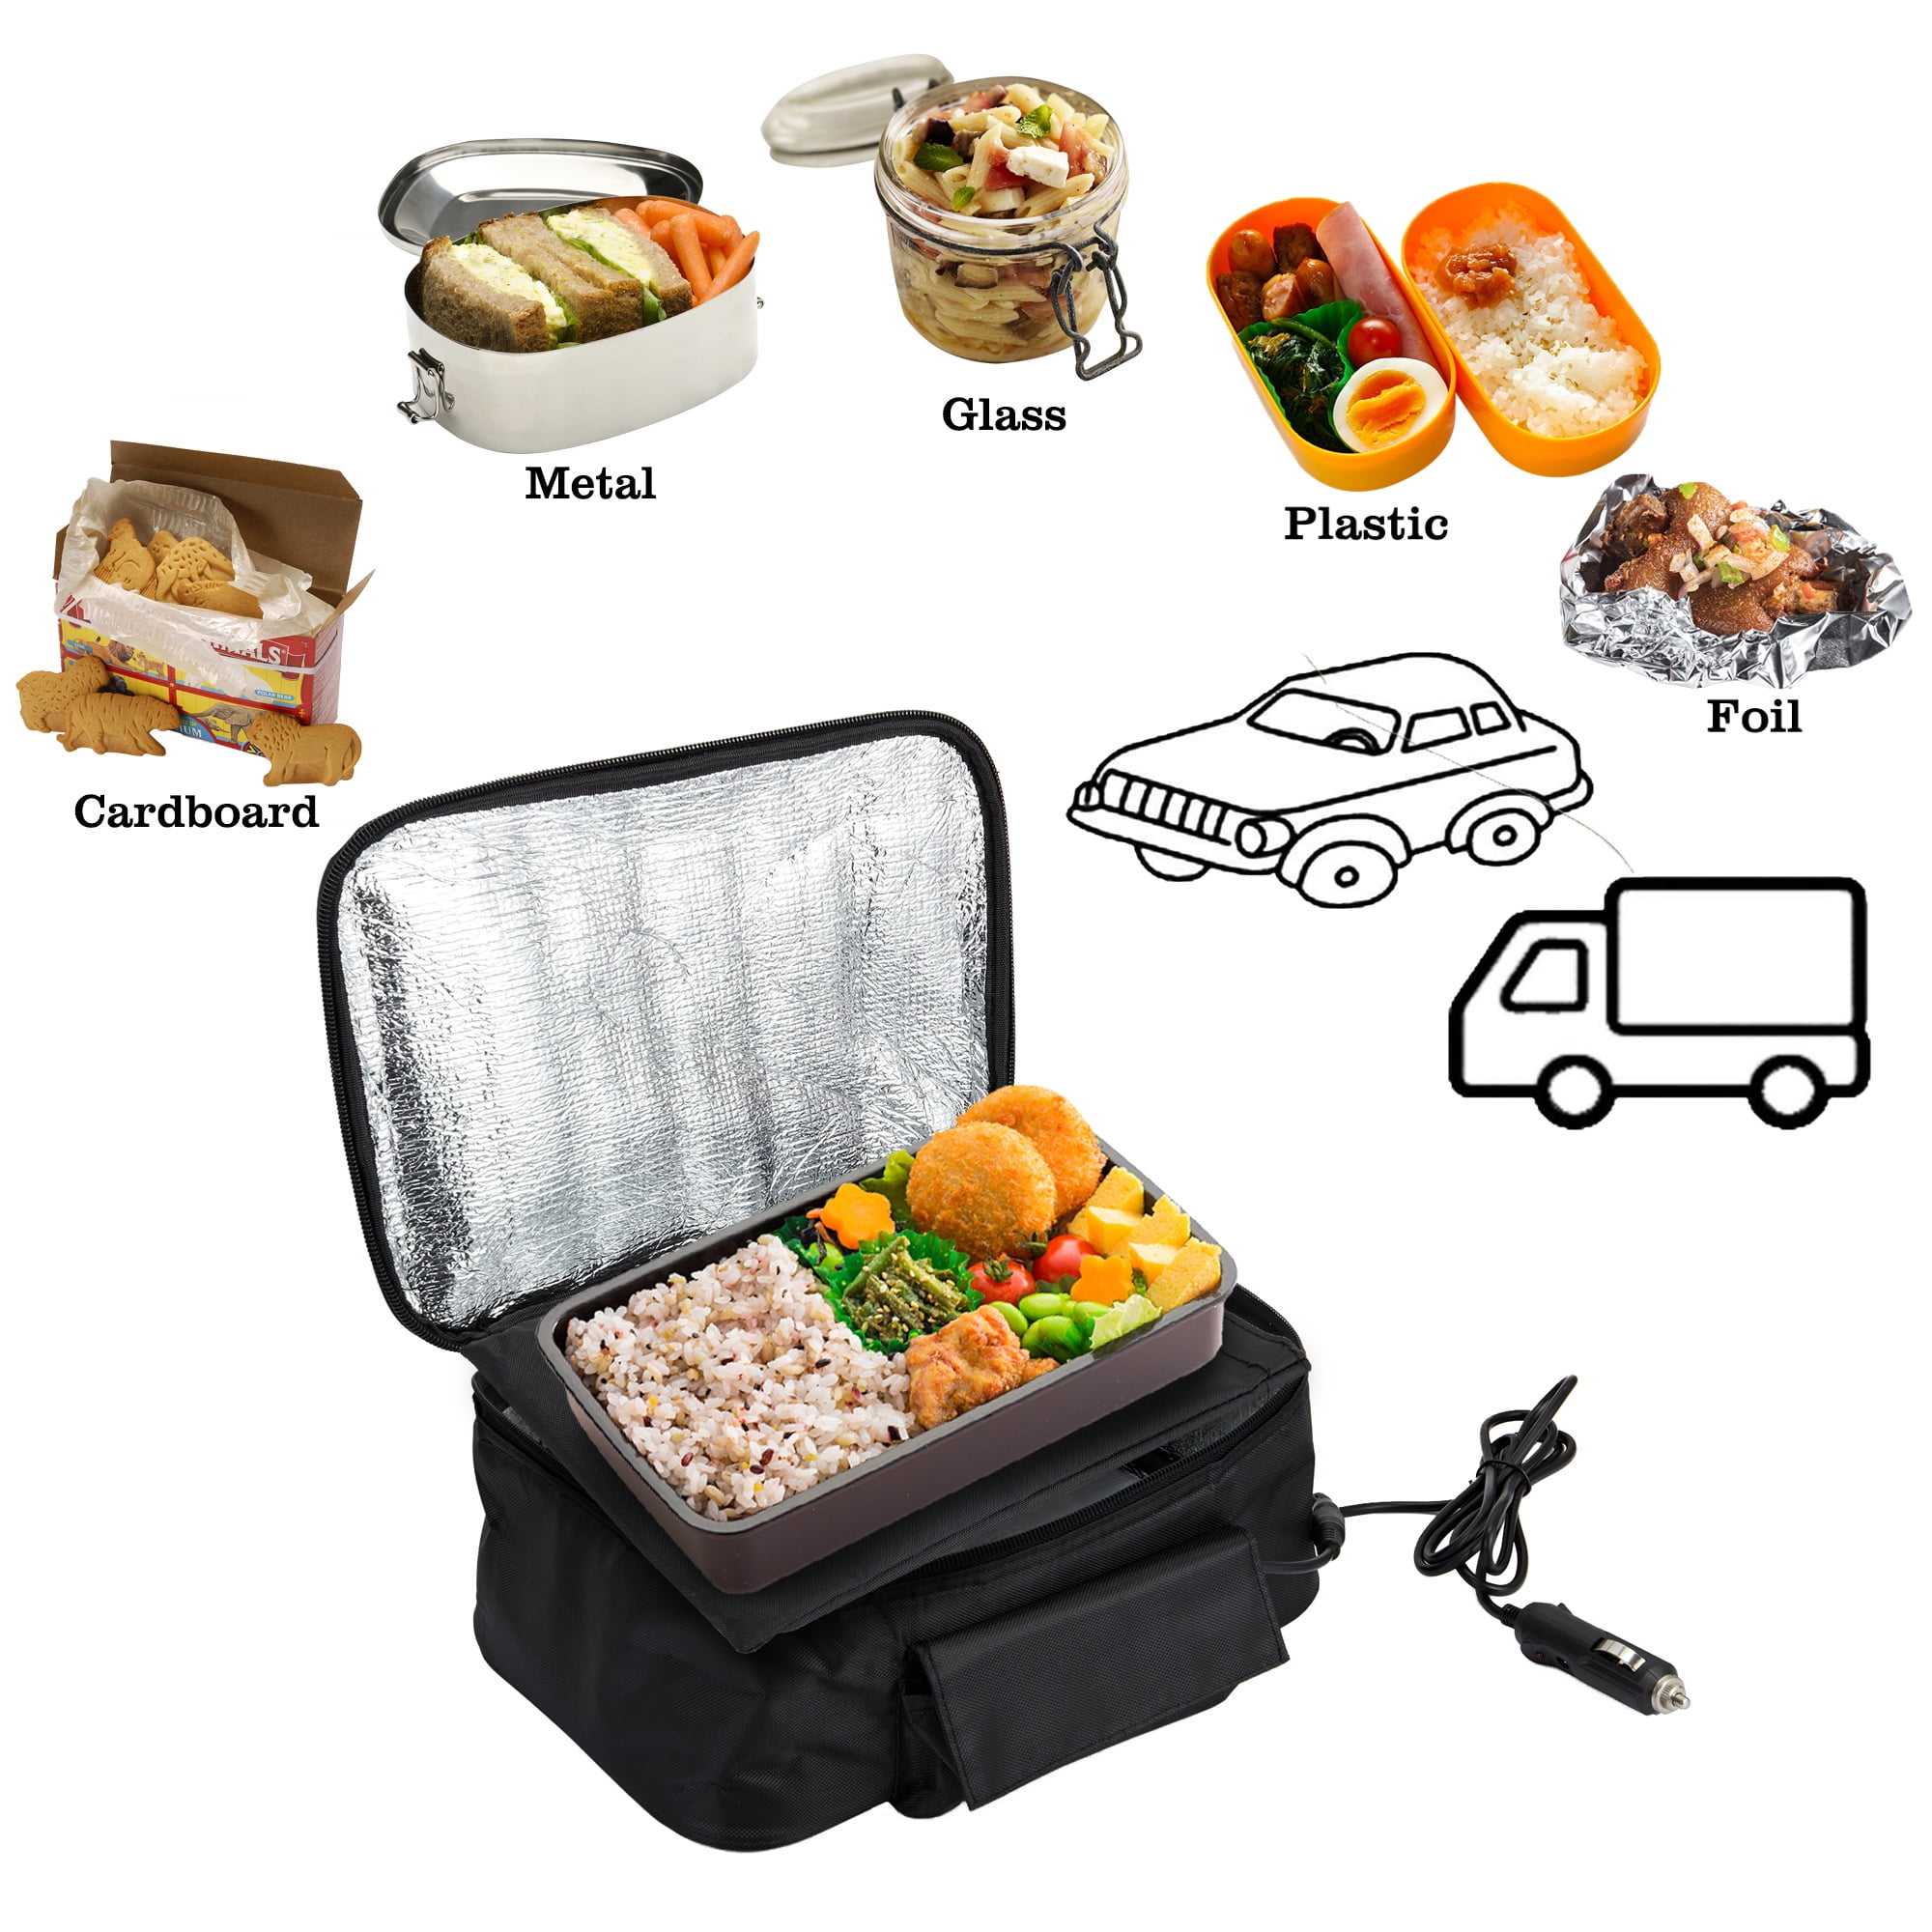 Picnic Camping Car Portable Electric Oven Hot Food Heating Bag Lunch Box Heater 